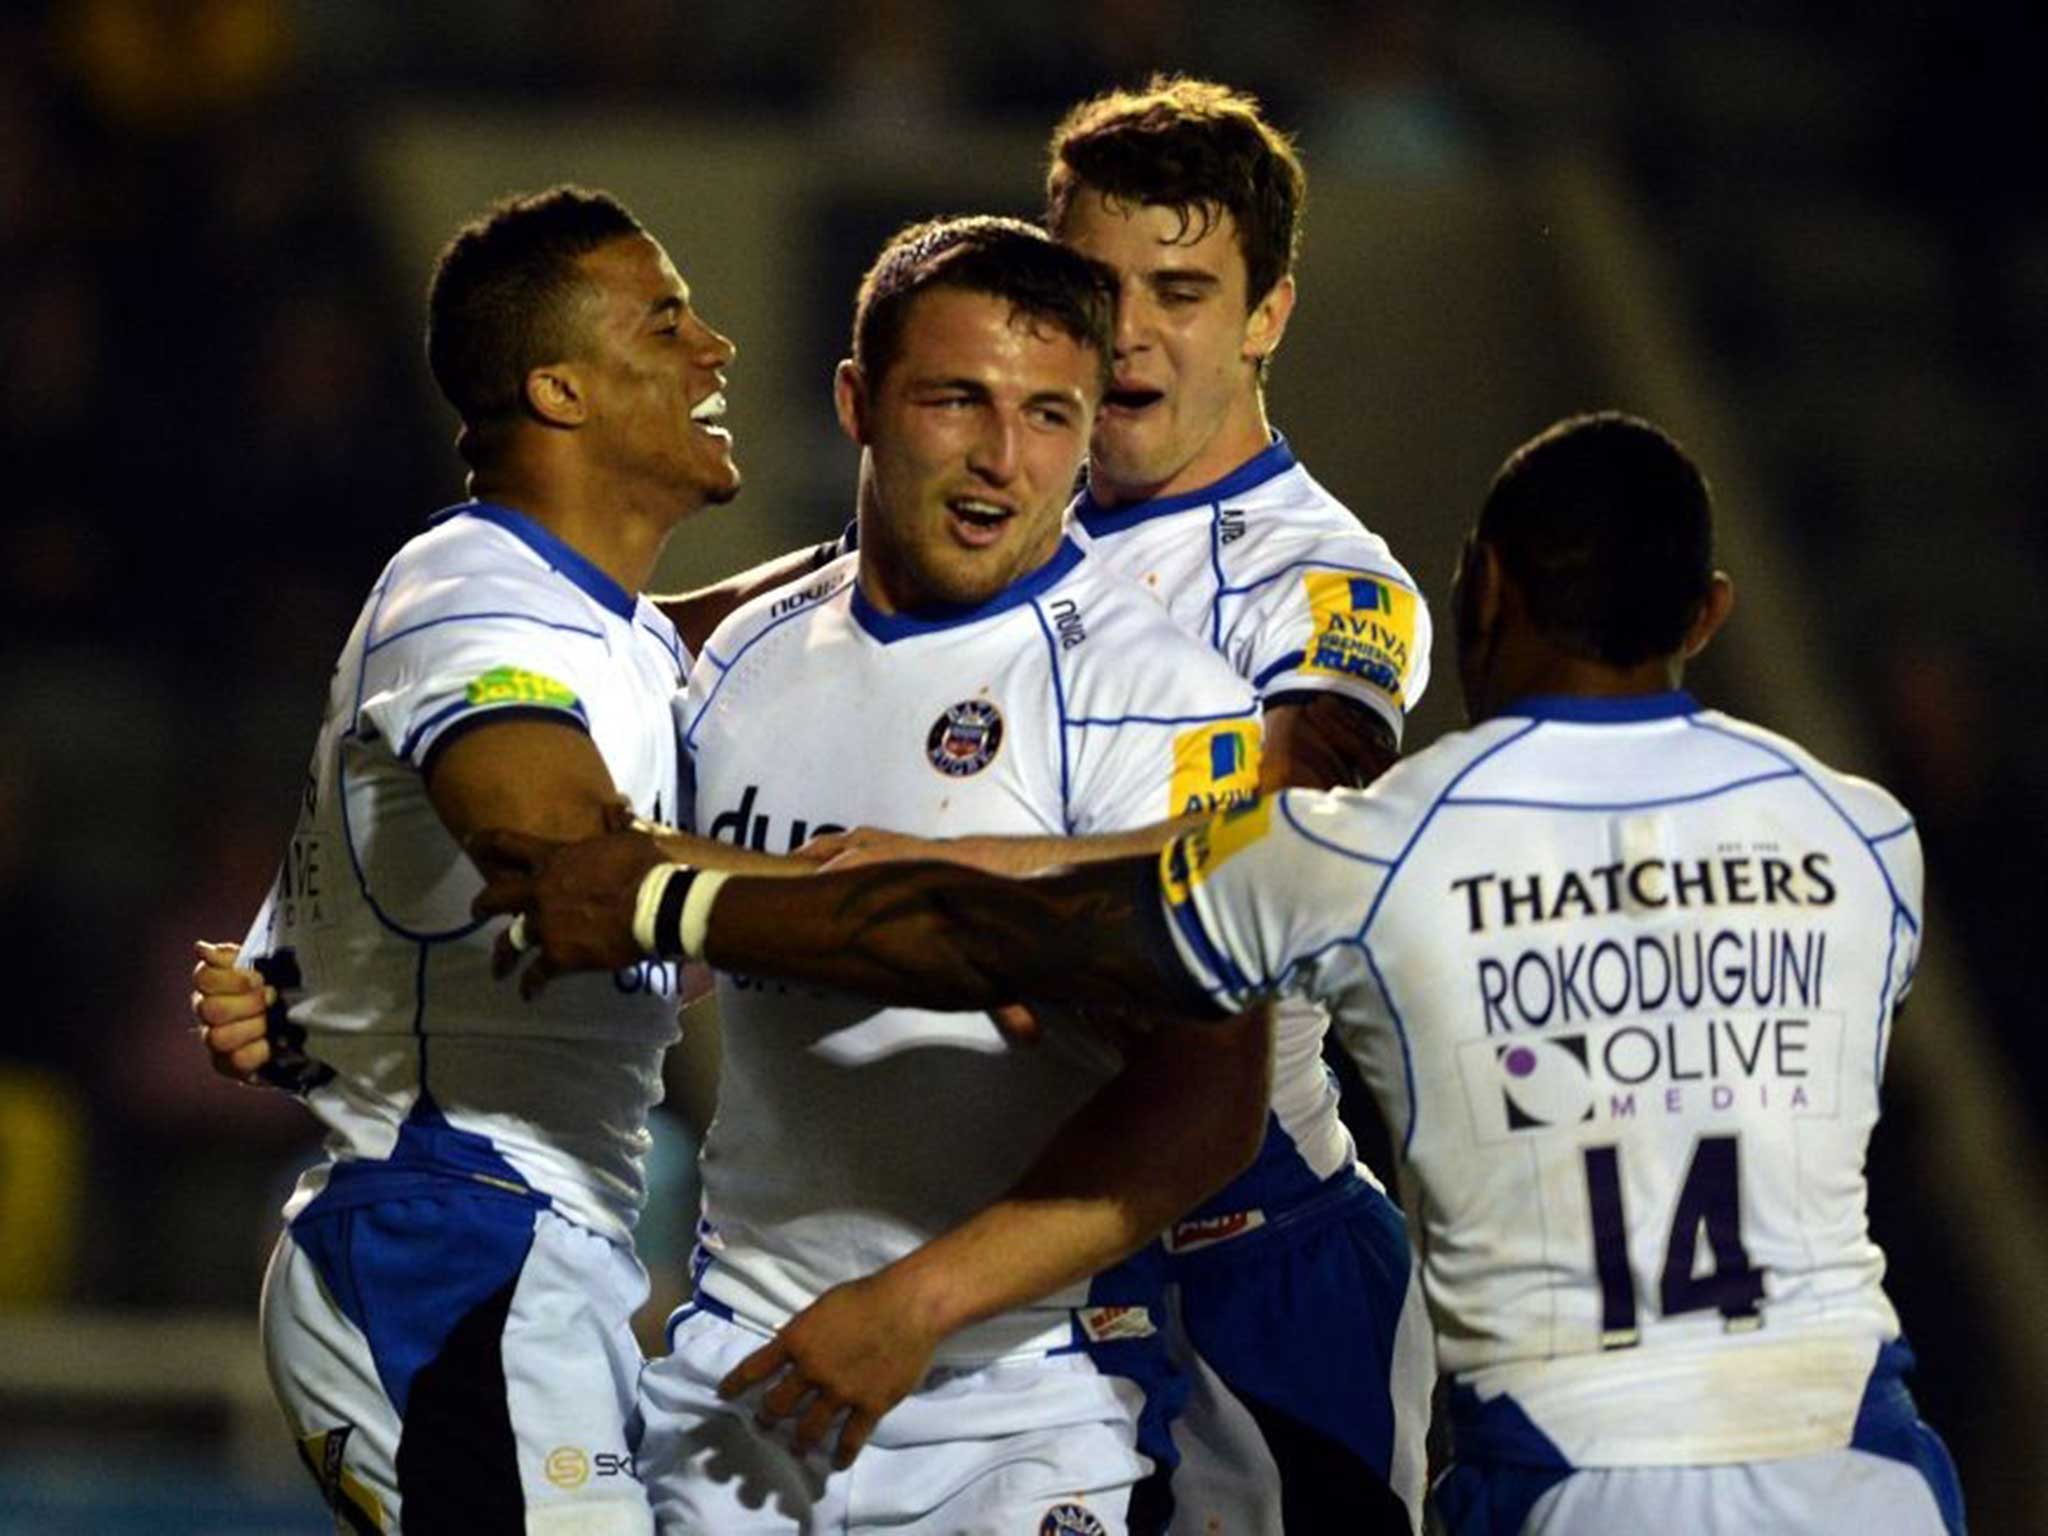 Anthony Watson (centre) celebrates with his Bath team-mates after scoring a try in their 29-19 win at Newcastle which takes the visitors up to second in the Premiership table